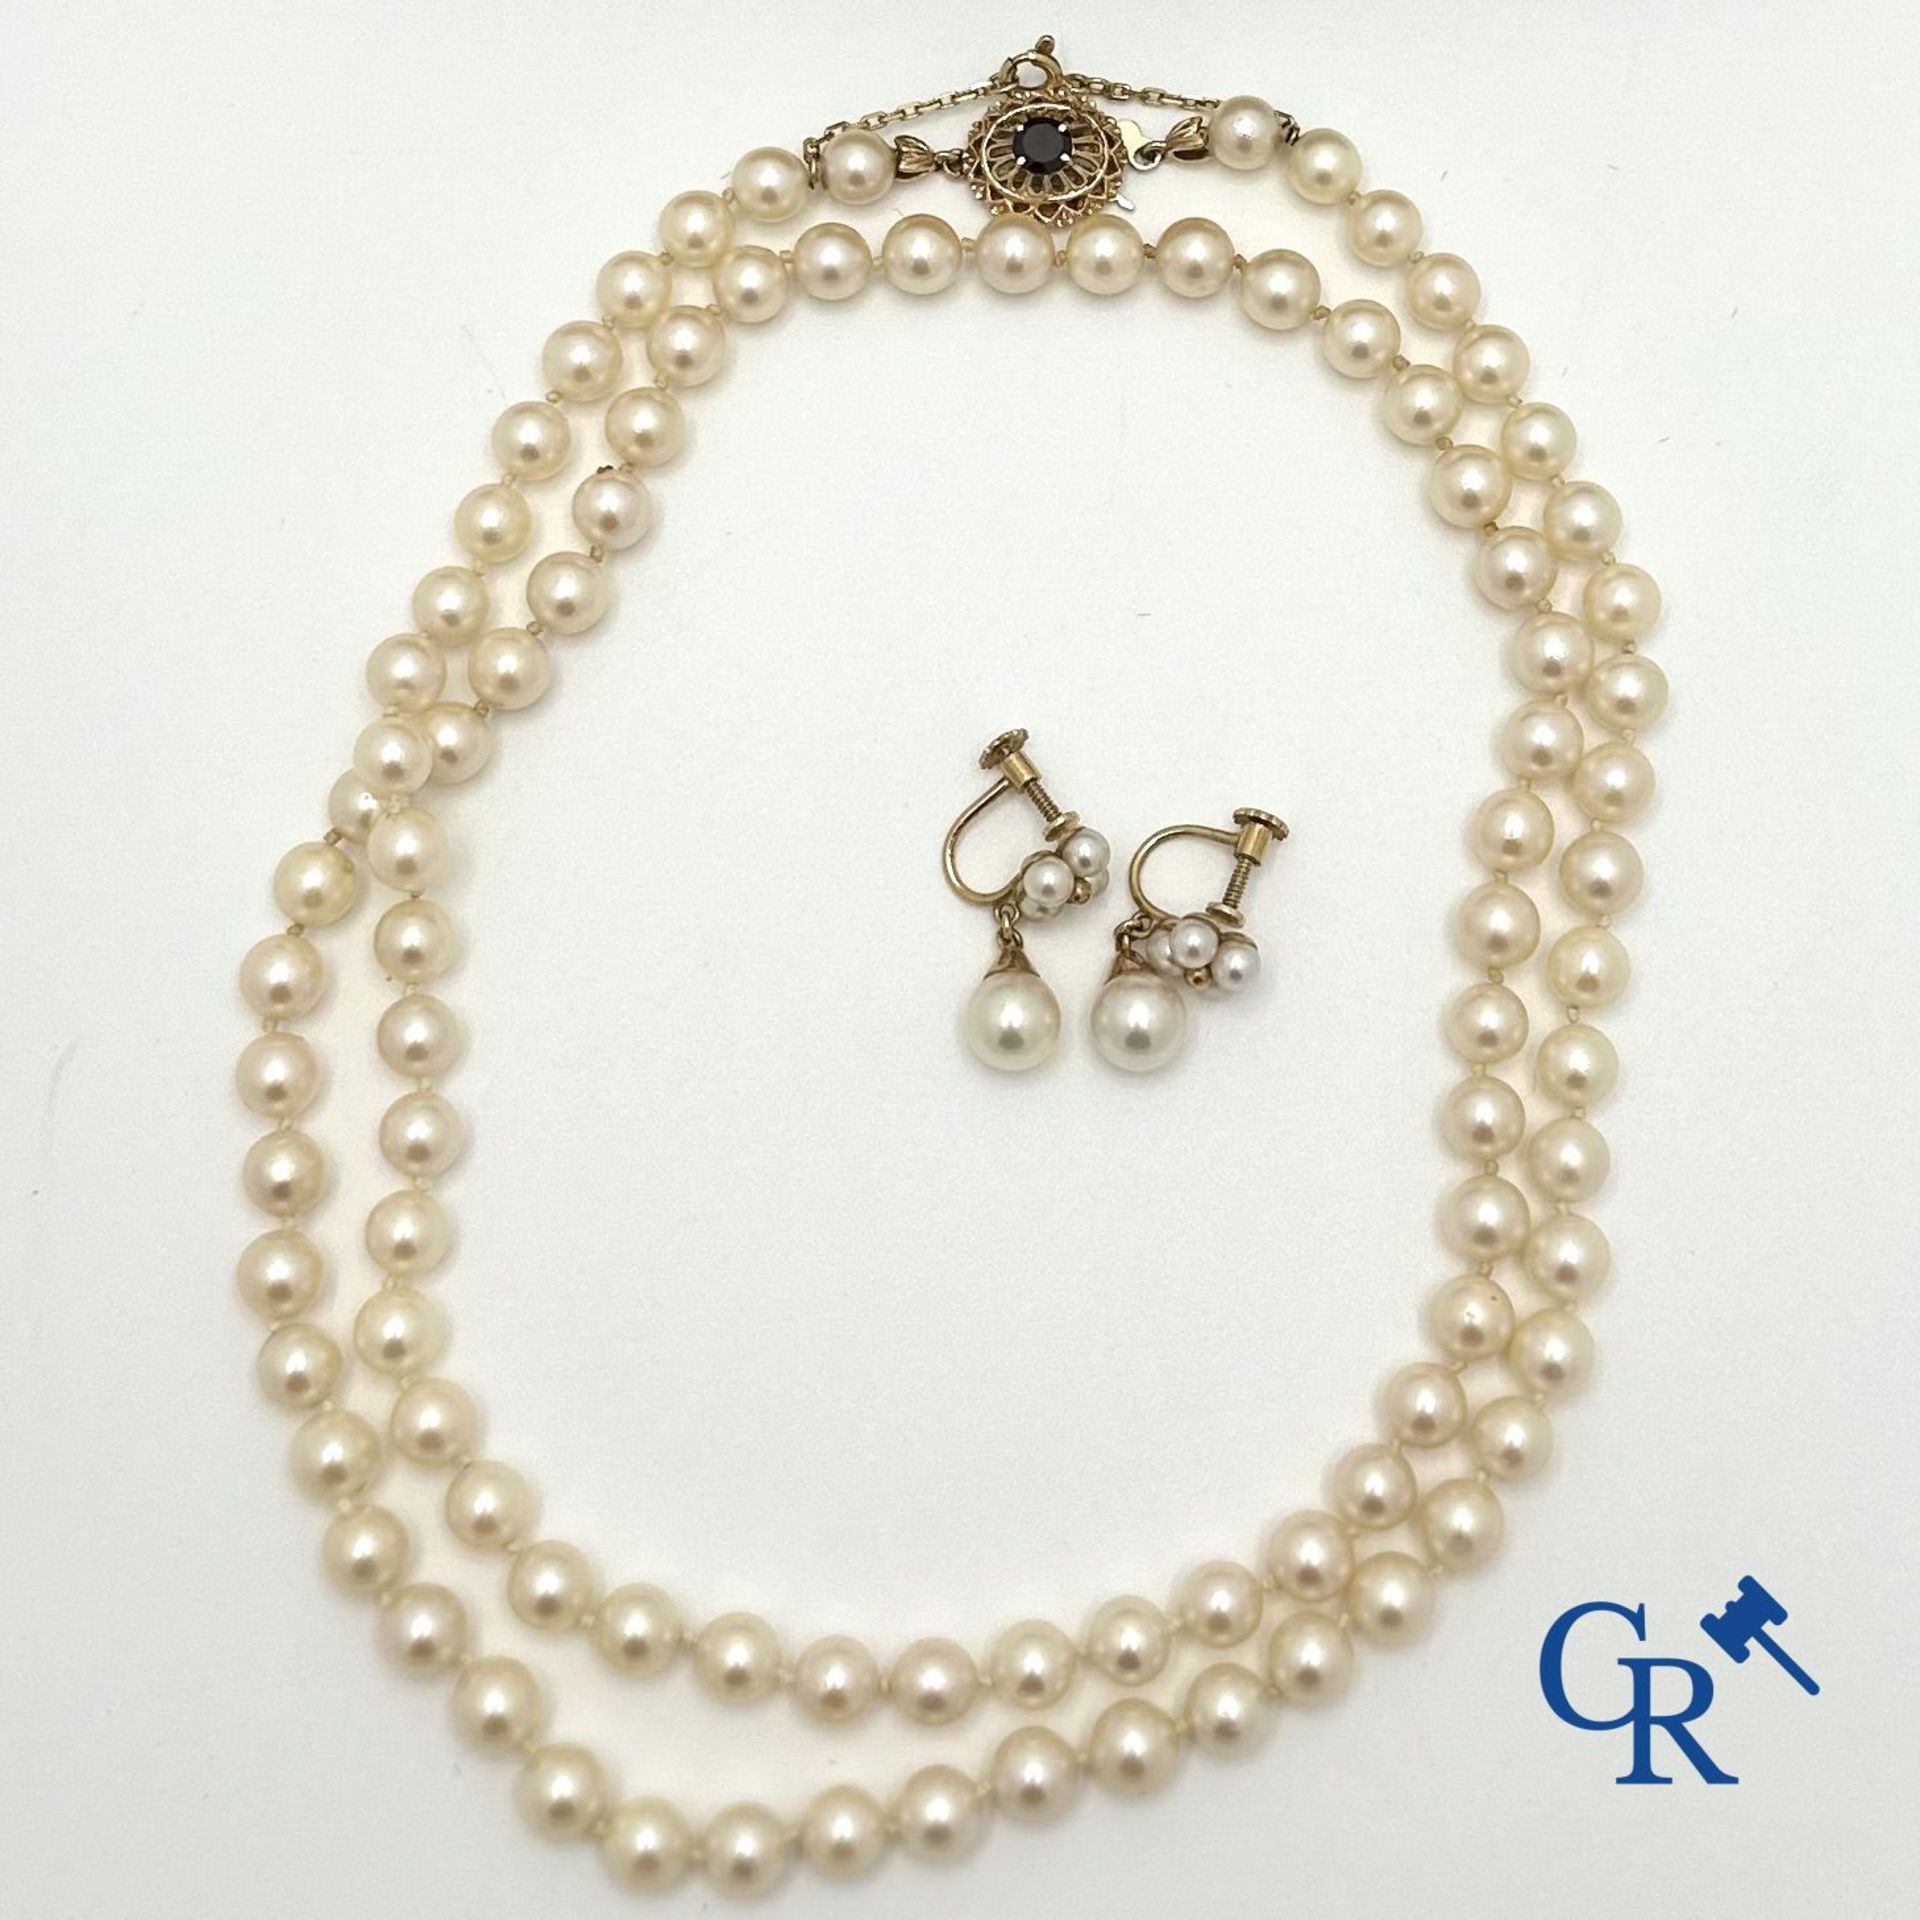 Jewellery: Lot consisting of a pearl necklace with gold clasp 18K and a pair of earrings in gold 18K